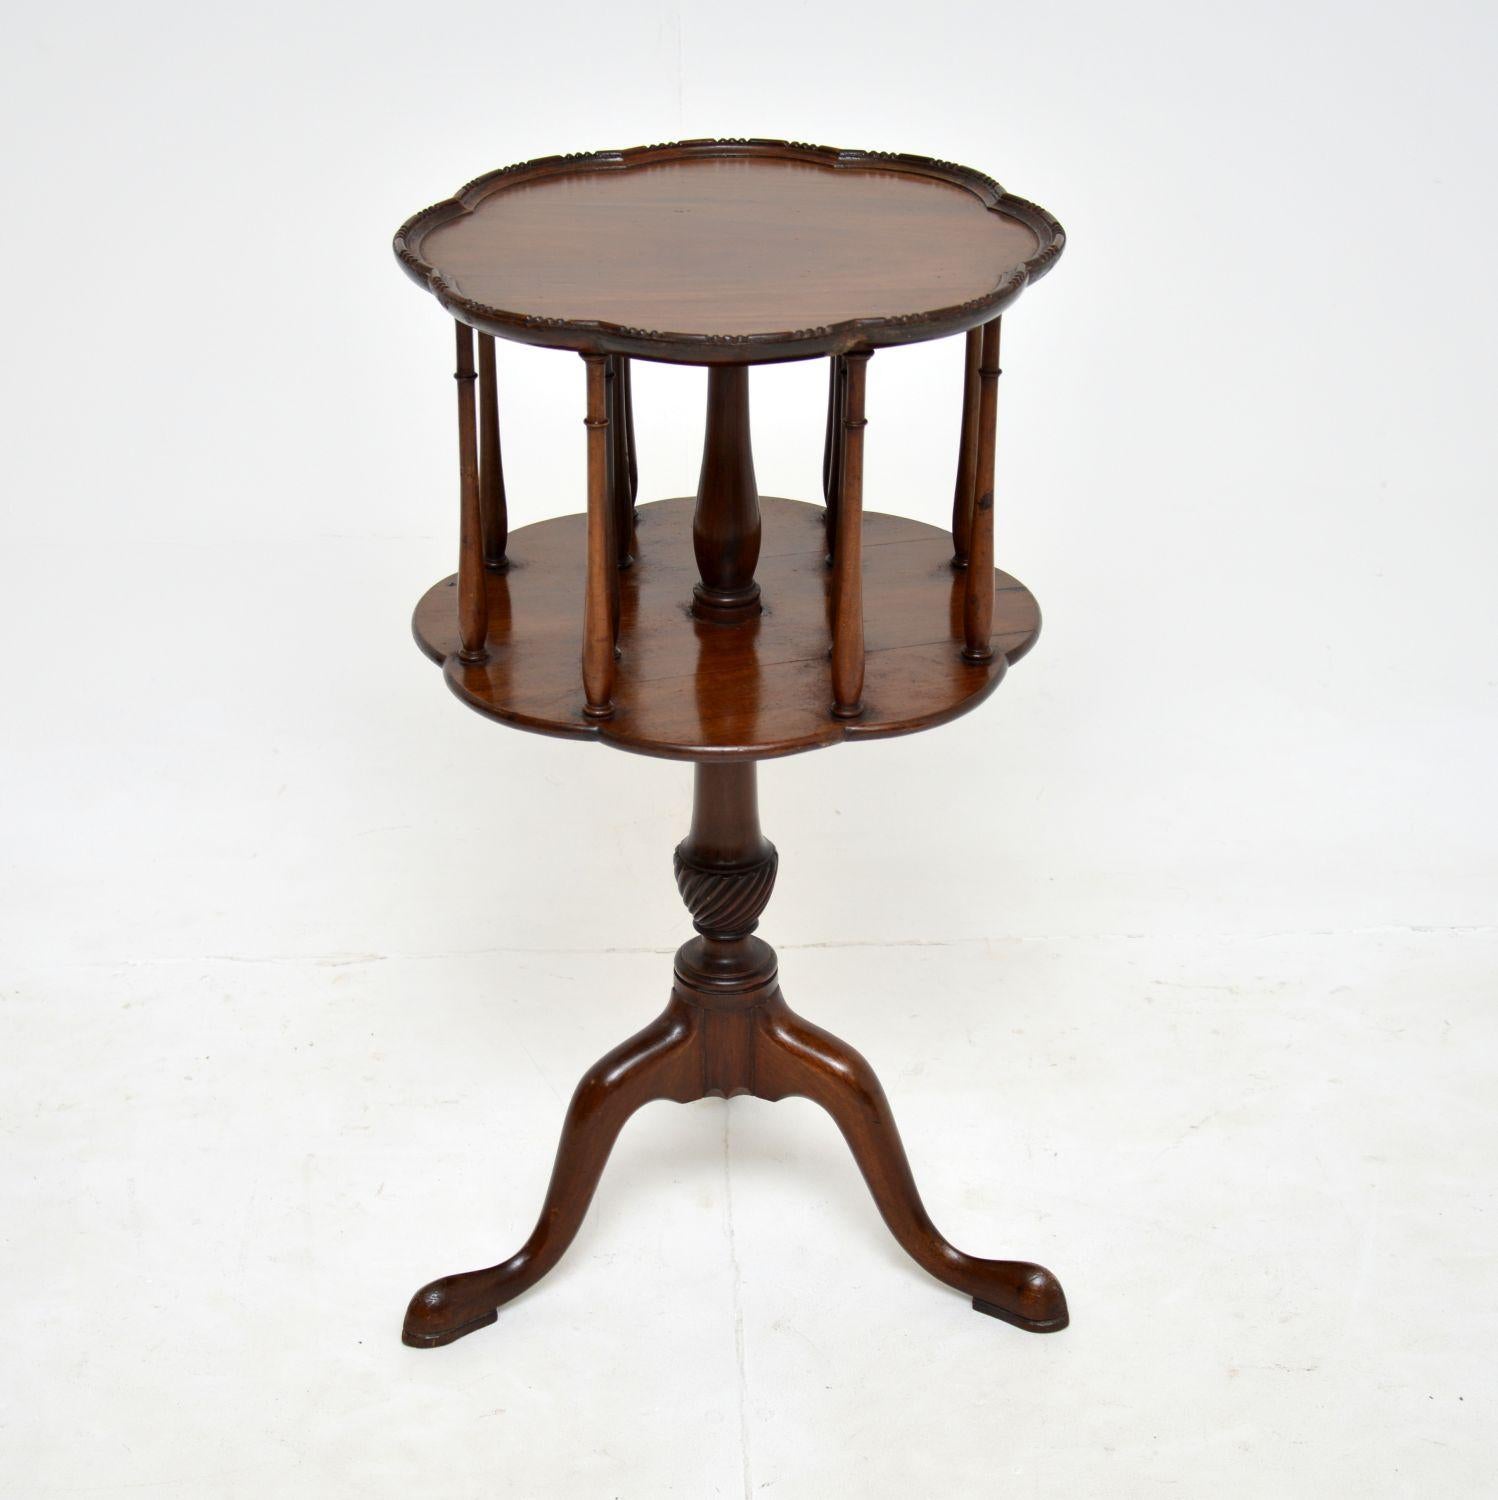 A beautiful and unusual antique occasional table. This was made in England, it dates from around the 1900-1910 period.

It is very well made, with a nicely shaped two tier top that revolves on the base. It is perfect for storing books and other